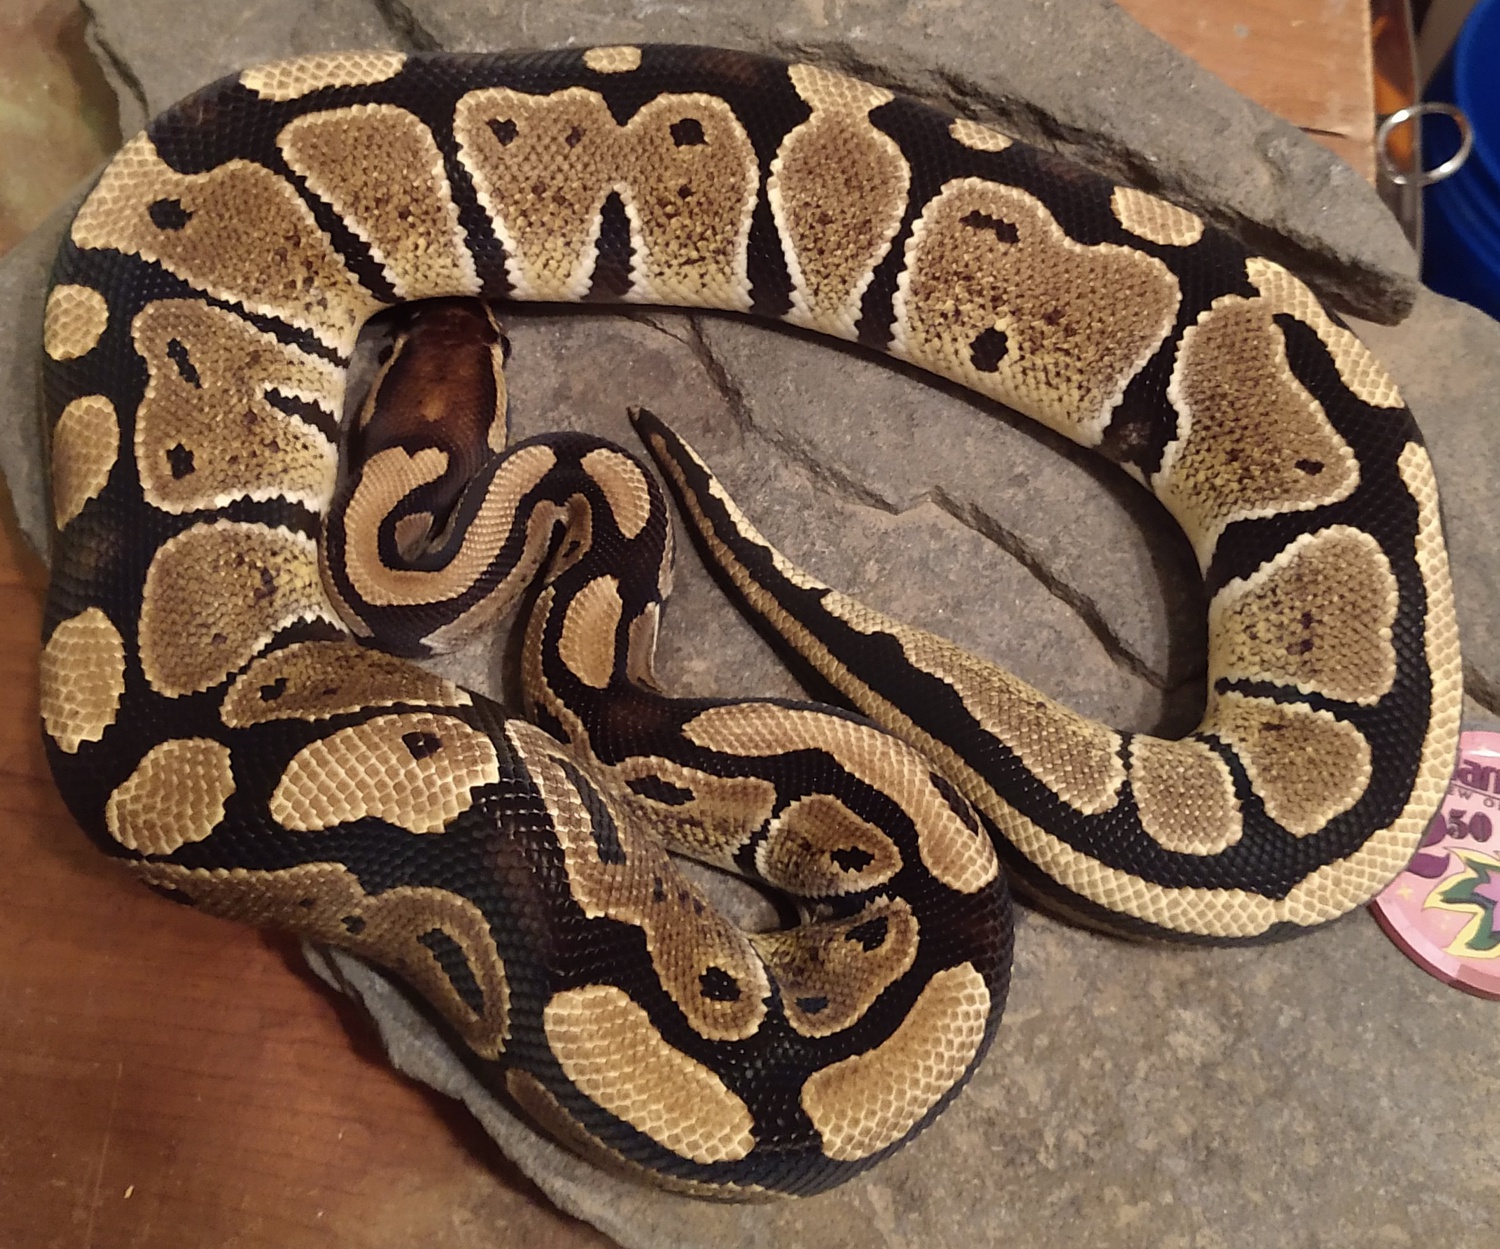 Normal Ball Python by Moore Expressions Reptiles